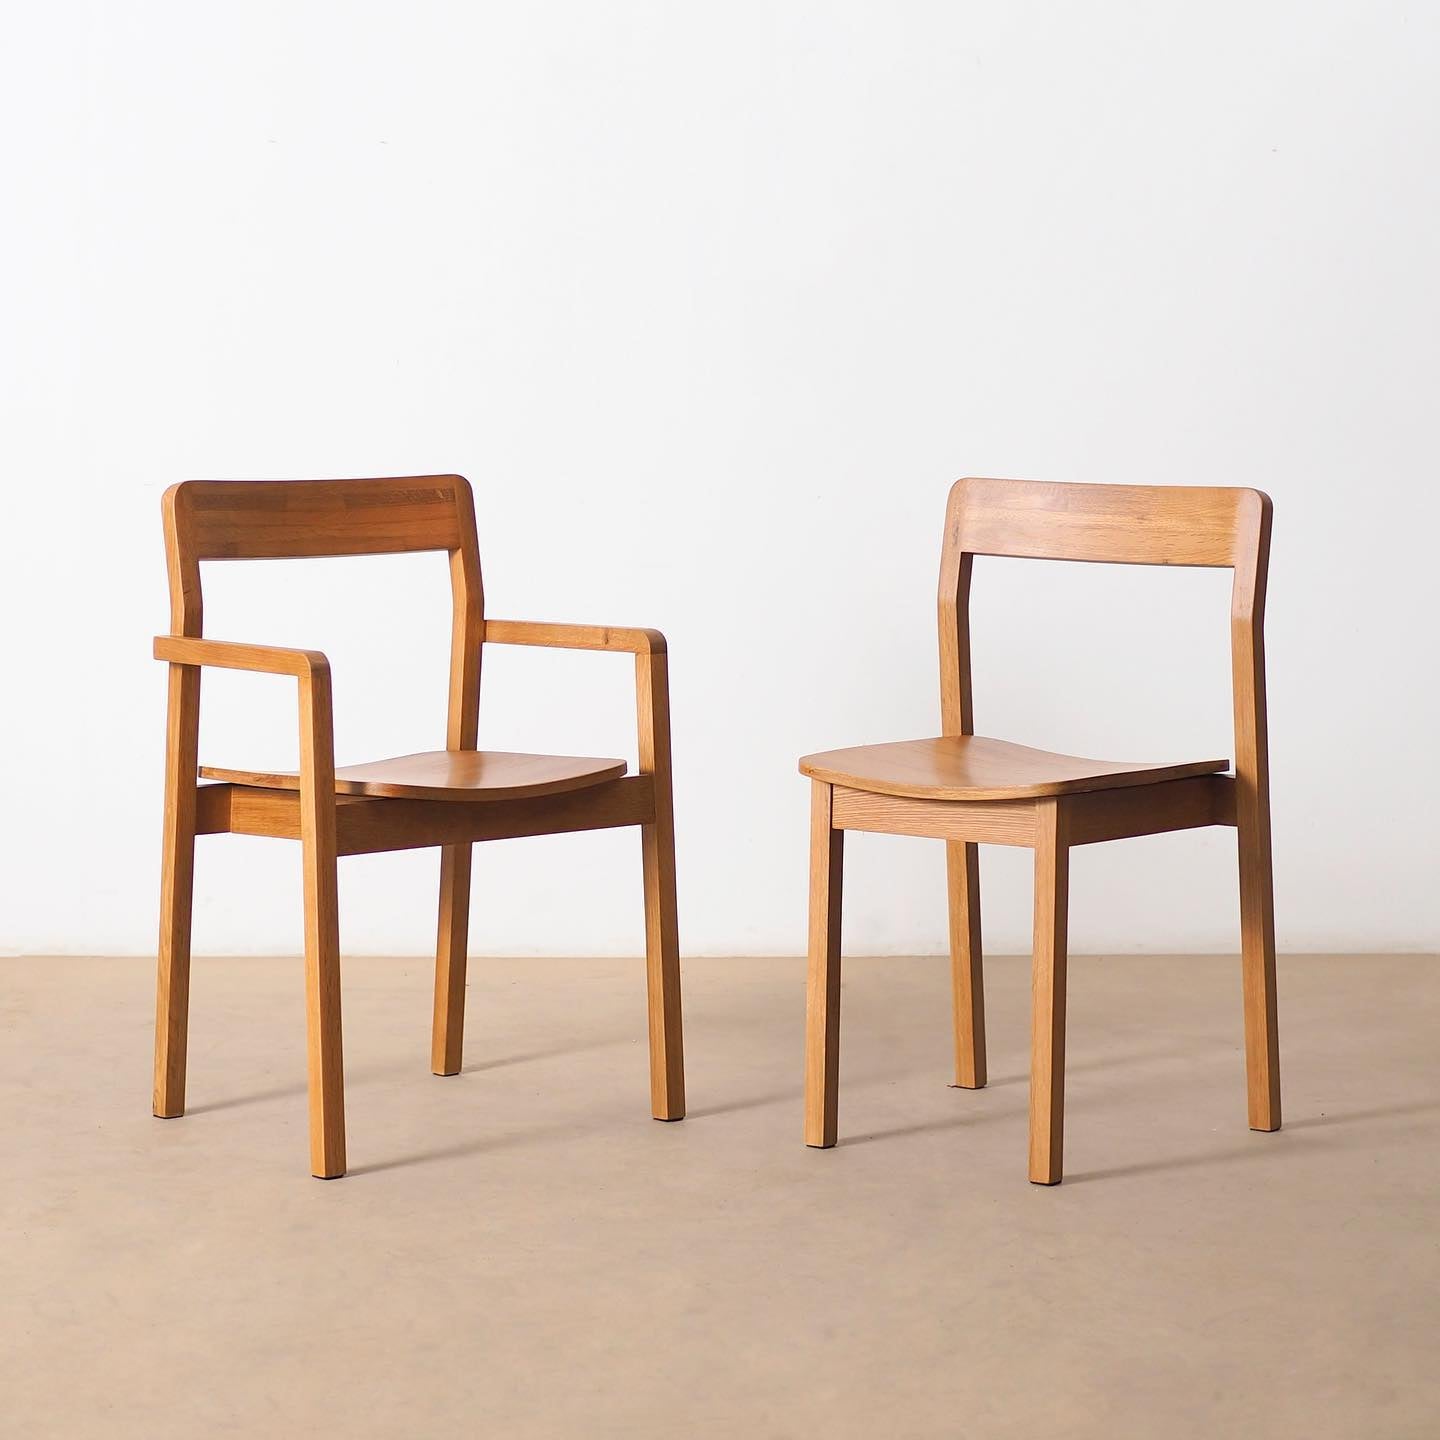 FLO - Timber Chair